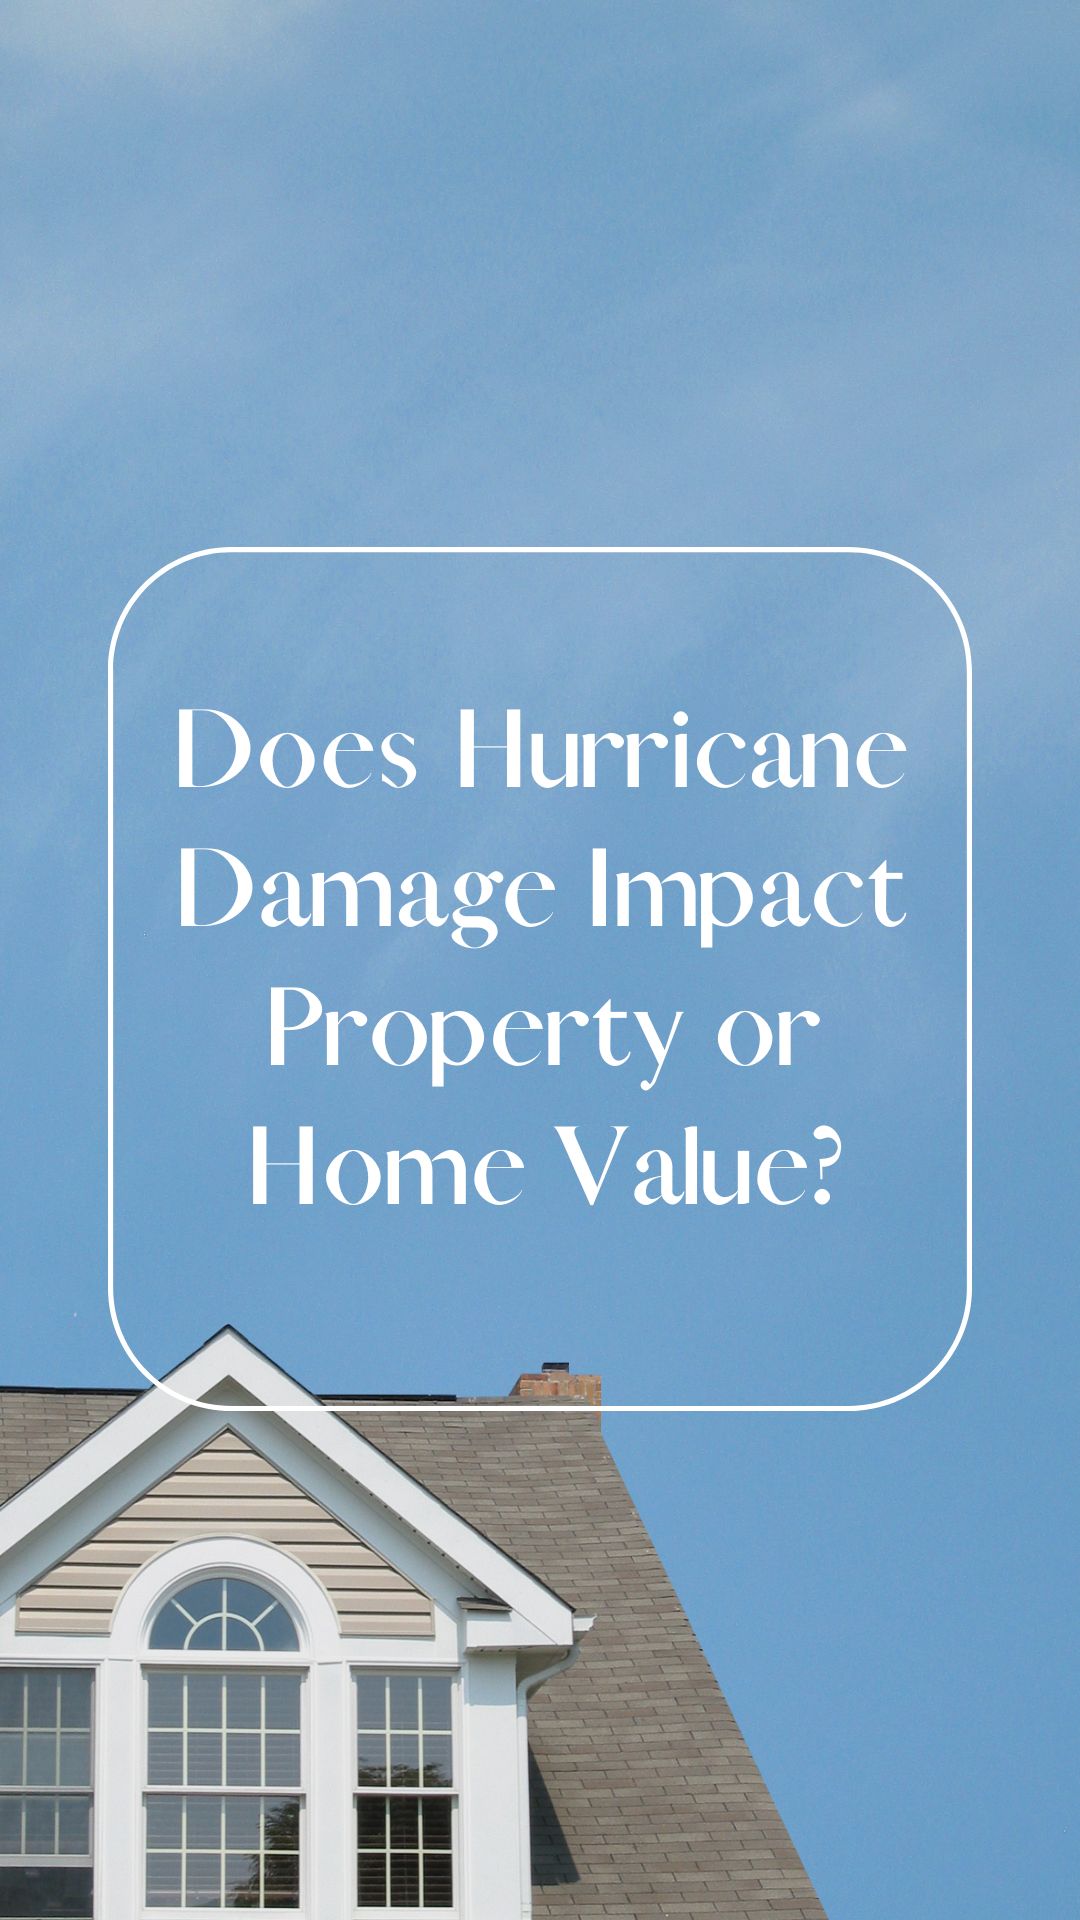 Does Hurricane Damage Impact Property or Home Value?